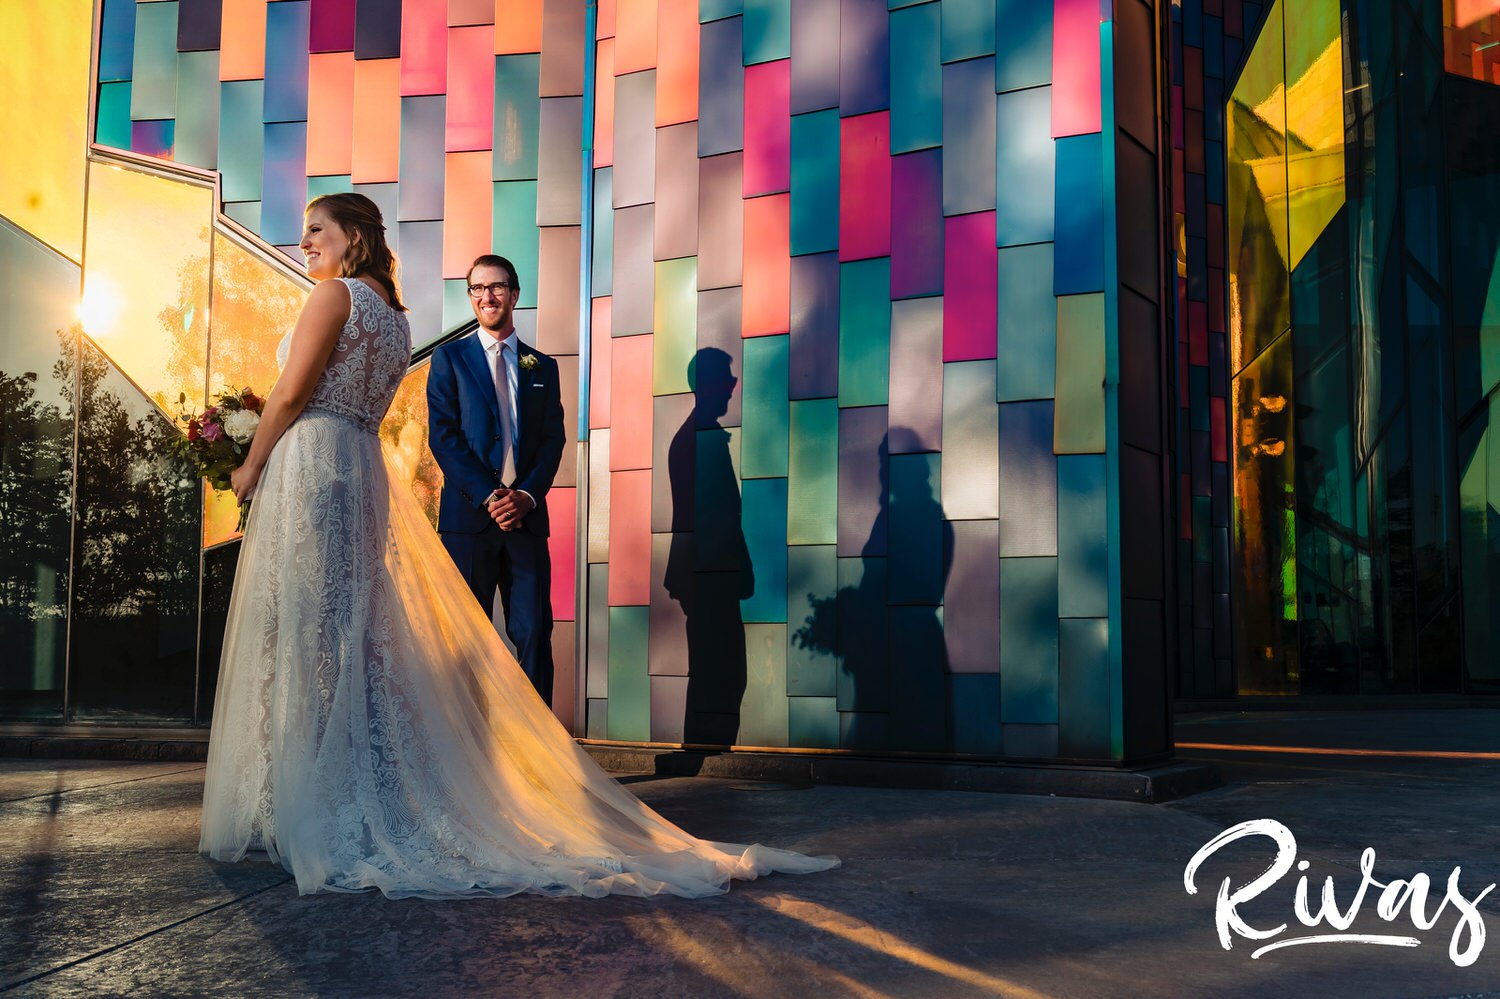 A colorful picture of a bride and groom holding hands, laughing together as they stand in front of the colorful tiled wall at The Museum at Prairiefire on the evening of their wedding. 